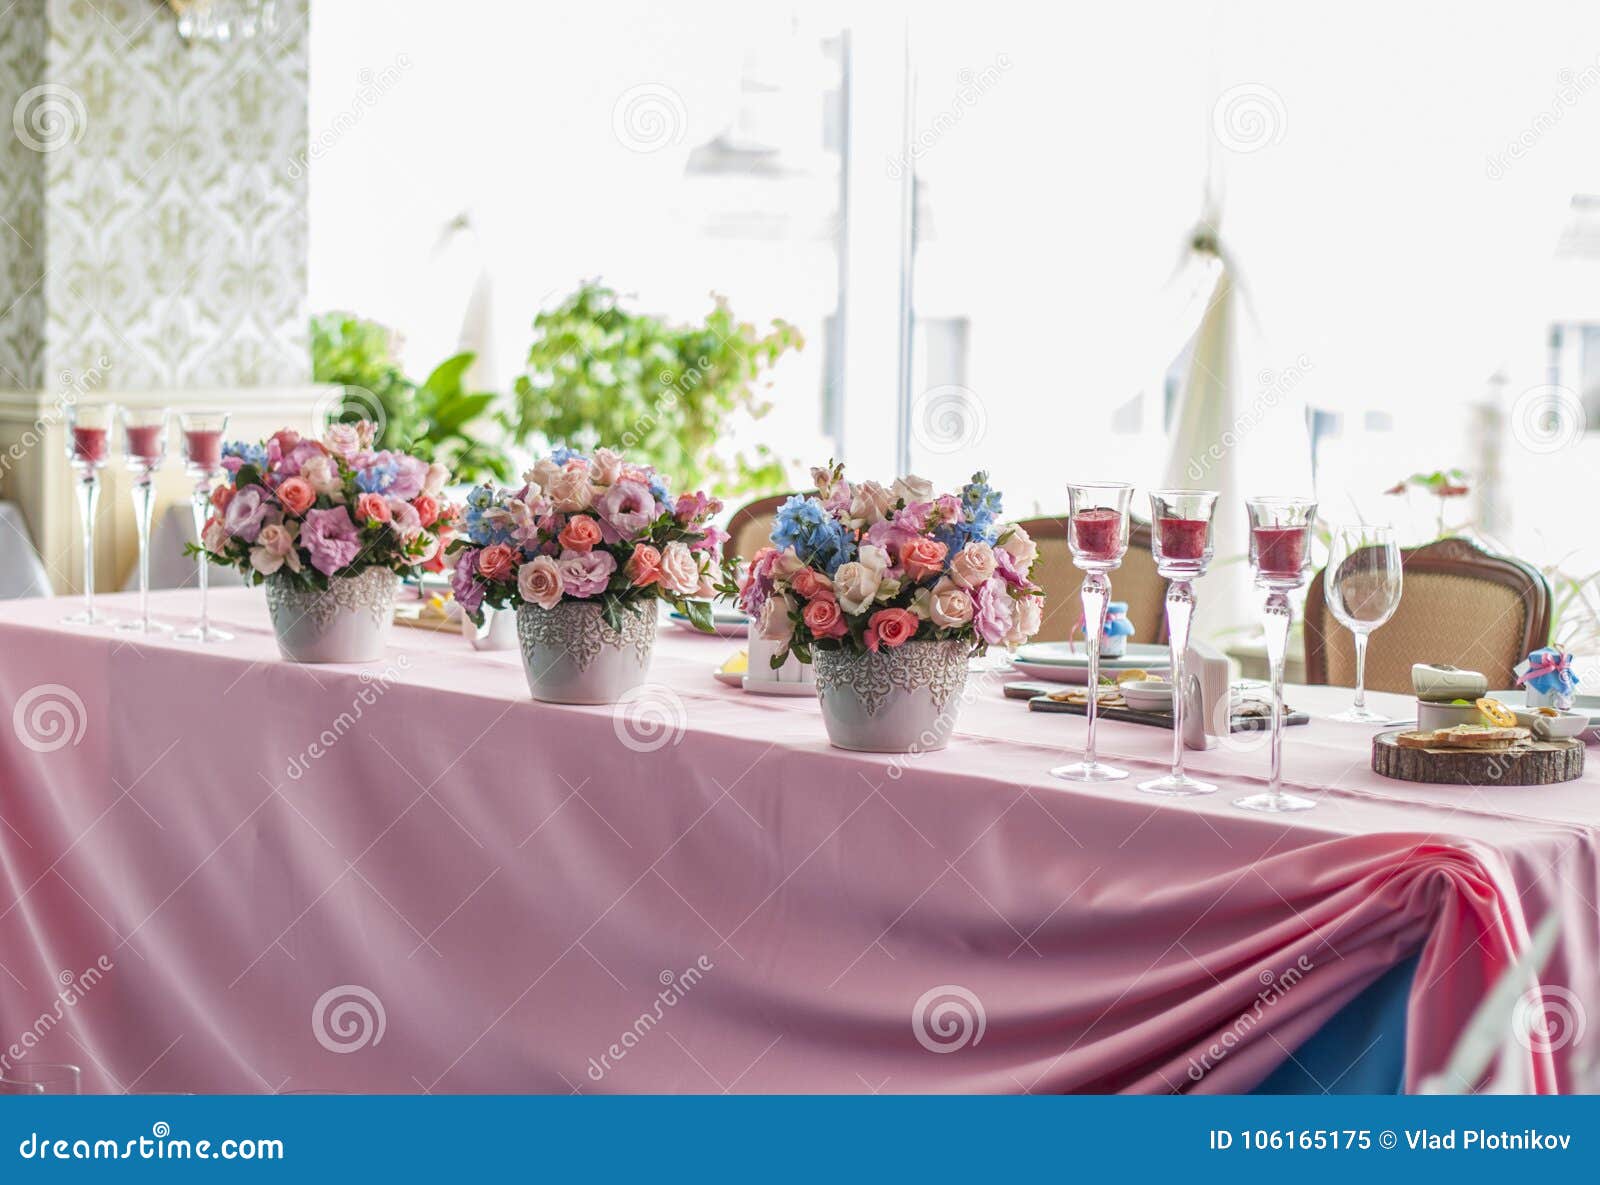 table set for an event party or wedding reception